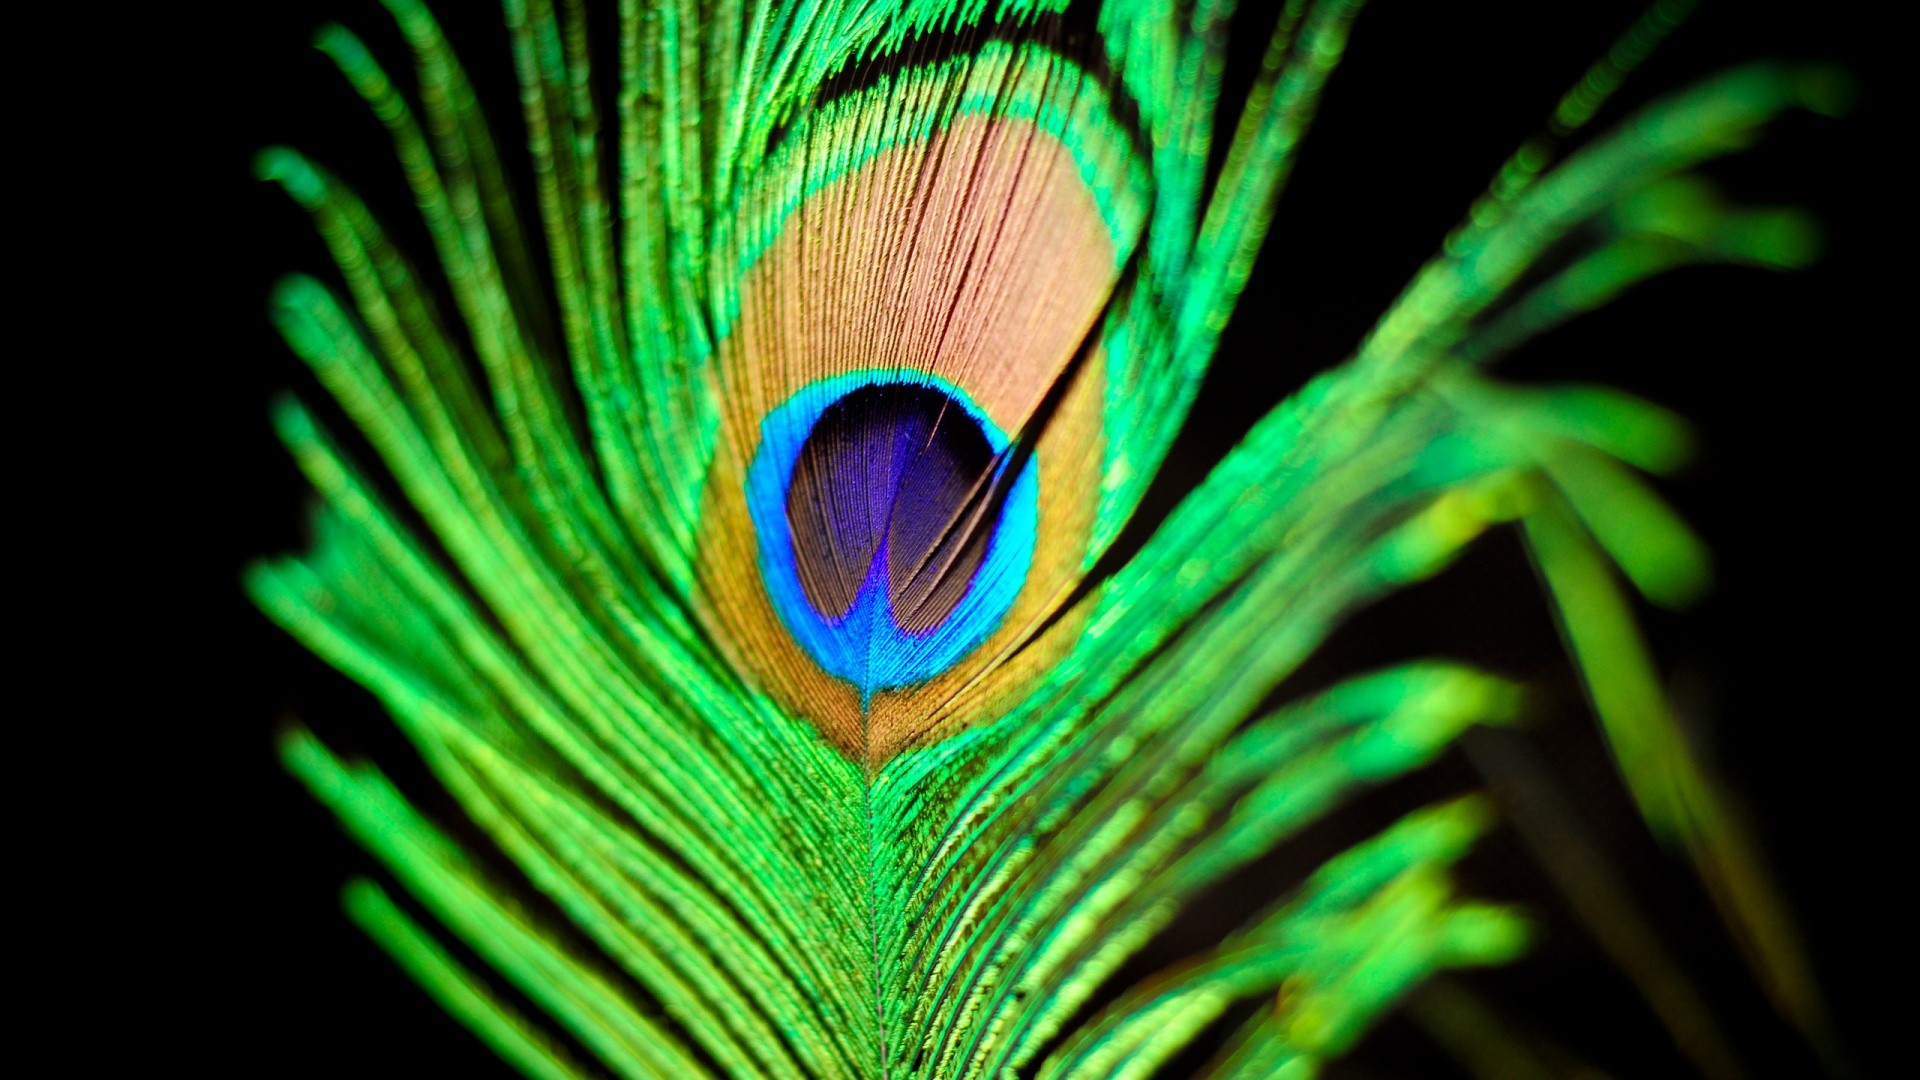 Peacock feather wallpaper   778127 1920x1080